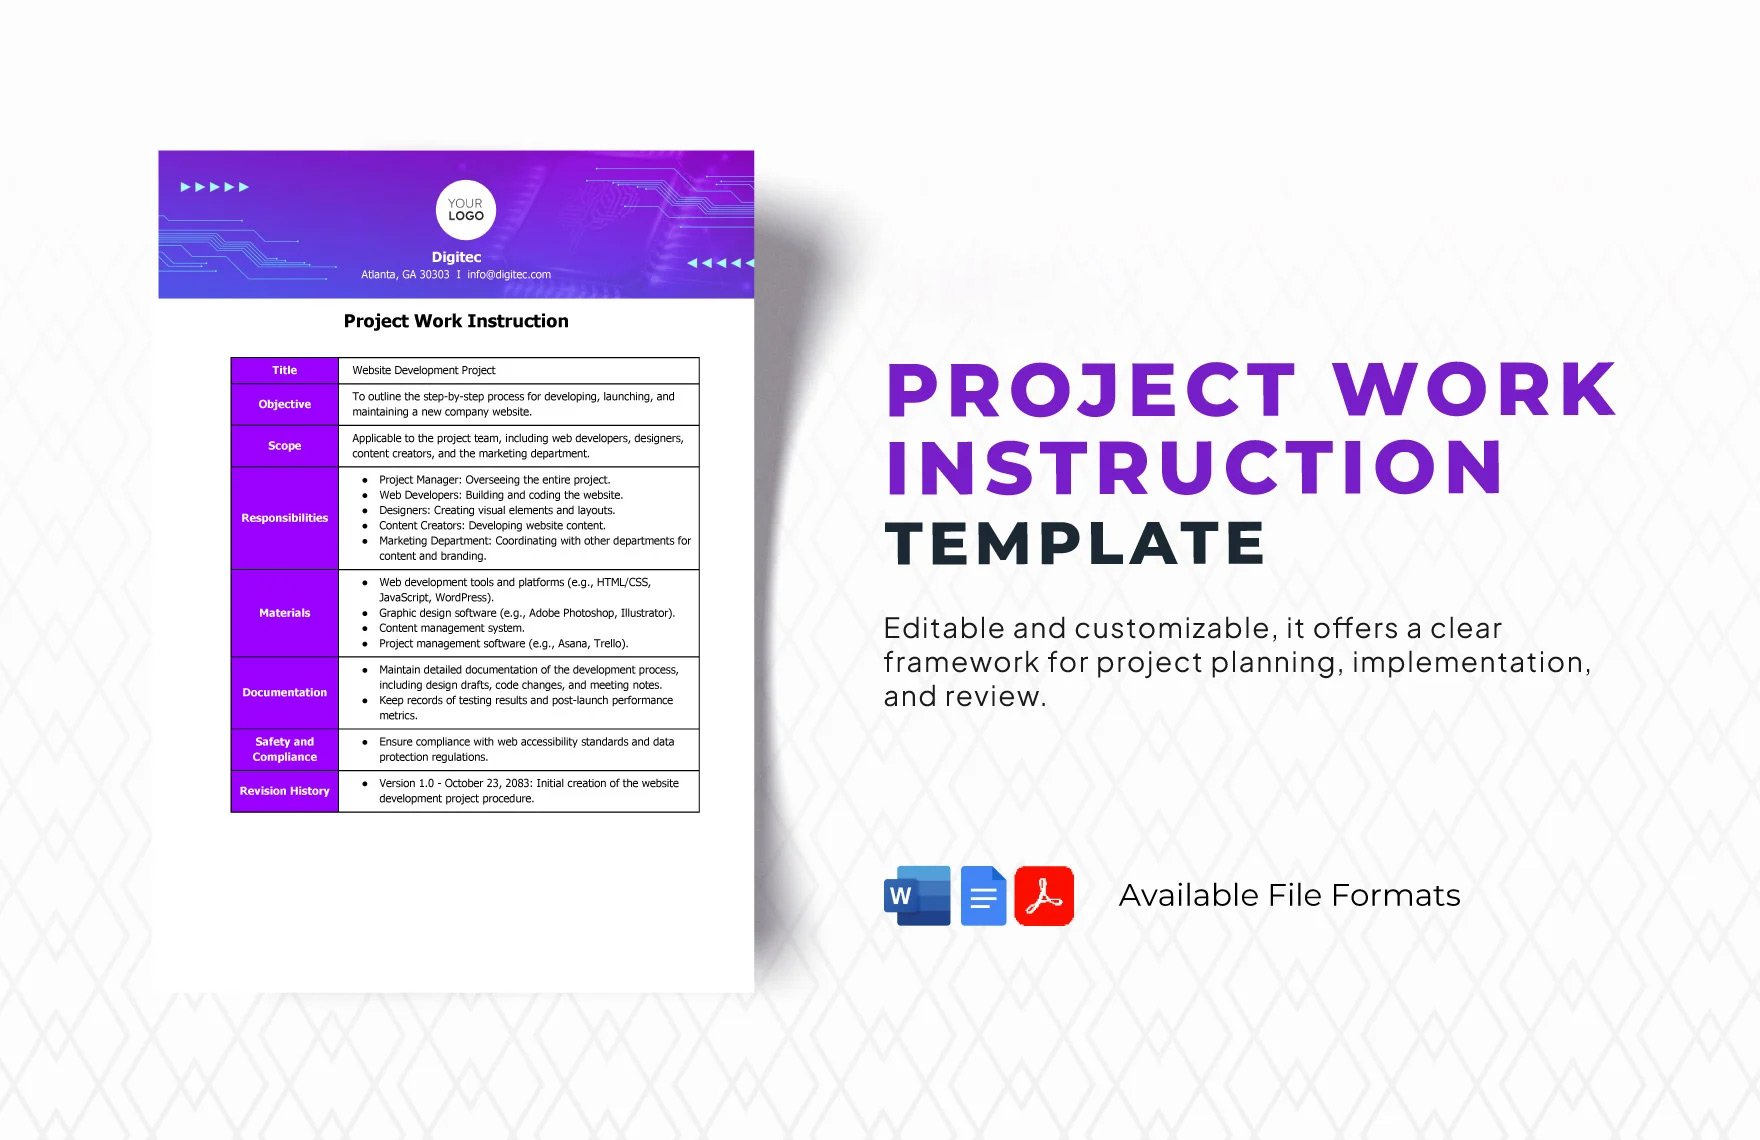 Free Project Work Instruction Template in Word, Google Docs, PDF